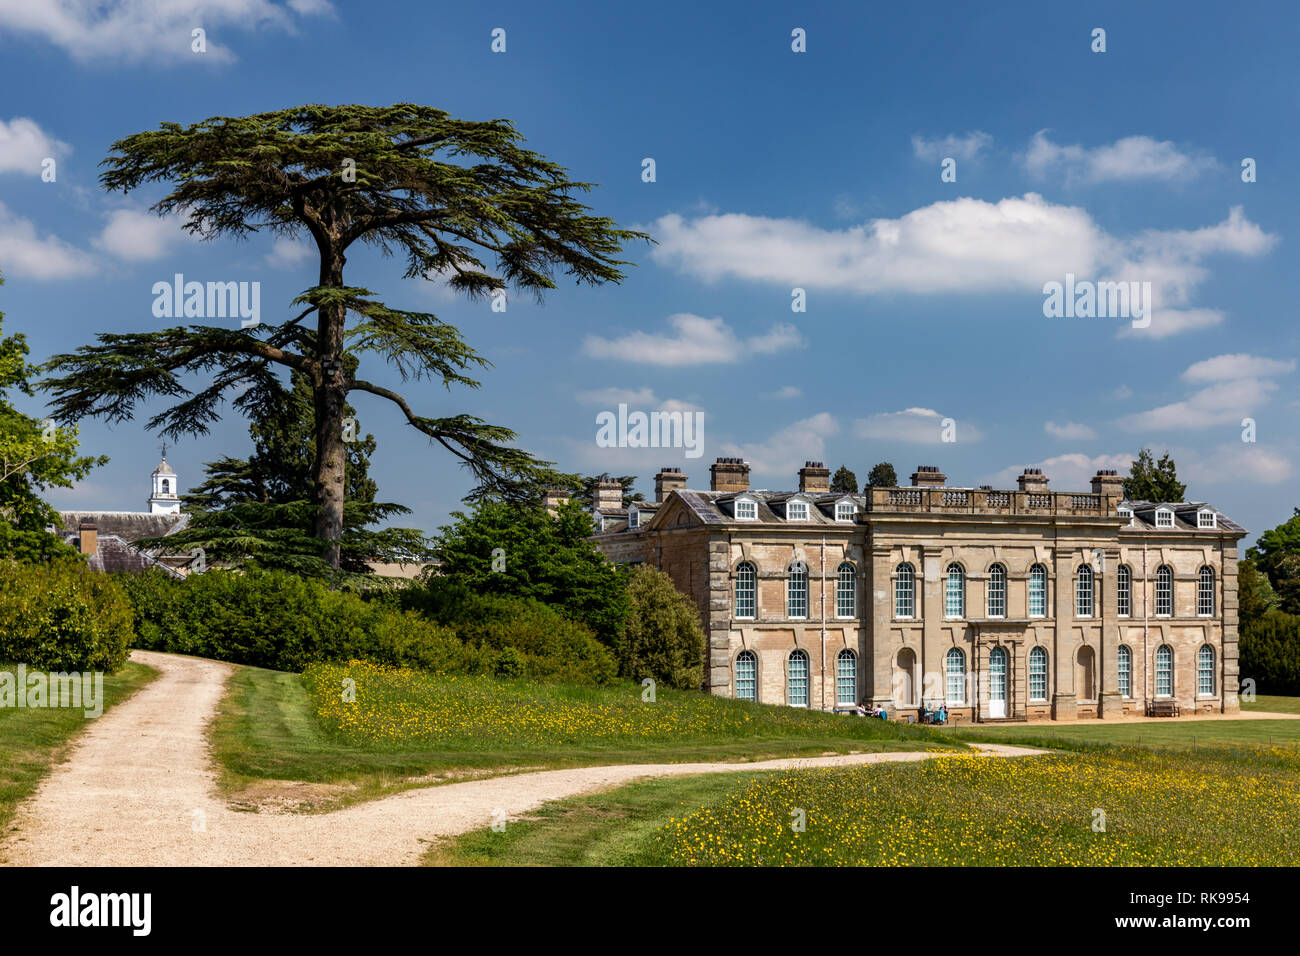 Compton Verney House  is an 18th-century country mansion at Compton Verney in Warwickshire, England. The gardens were landscaped by Capability Brown. Stock Photo